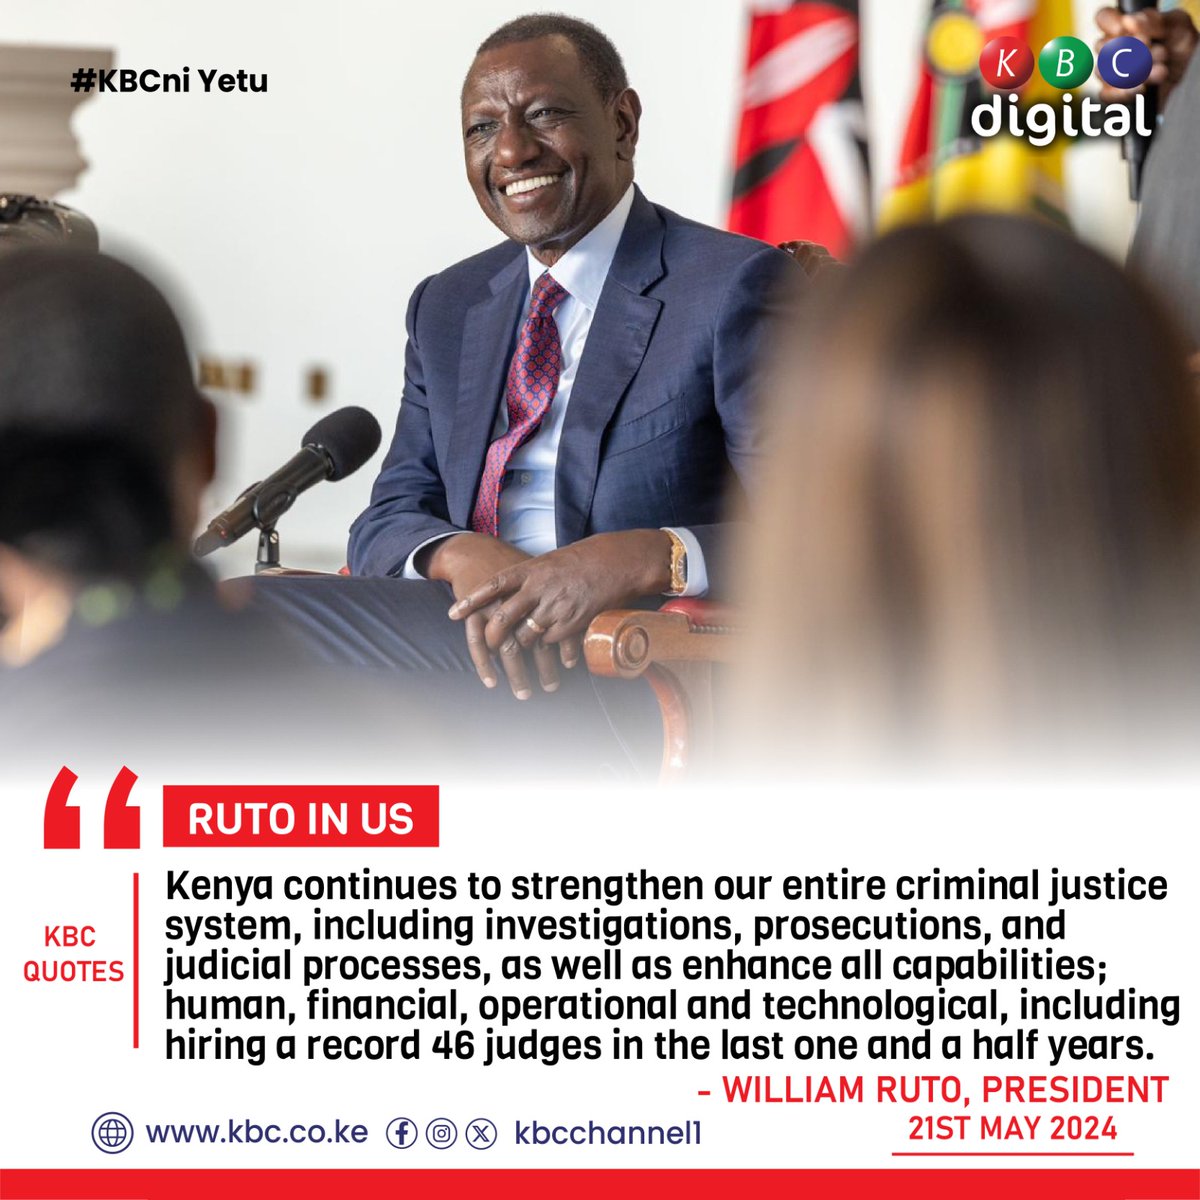 'Kenya continues to strengthen our entire criminal justice system, including investigations, prosecutions, and judicial processes, as well as enhance all capabilities; human, financial, operational and technological, including hiring a record 46 judges in the last one and a half